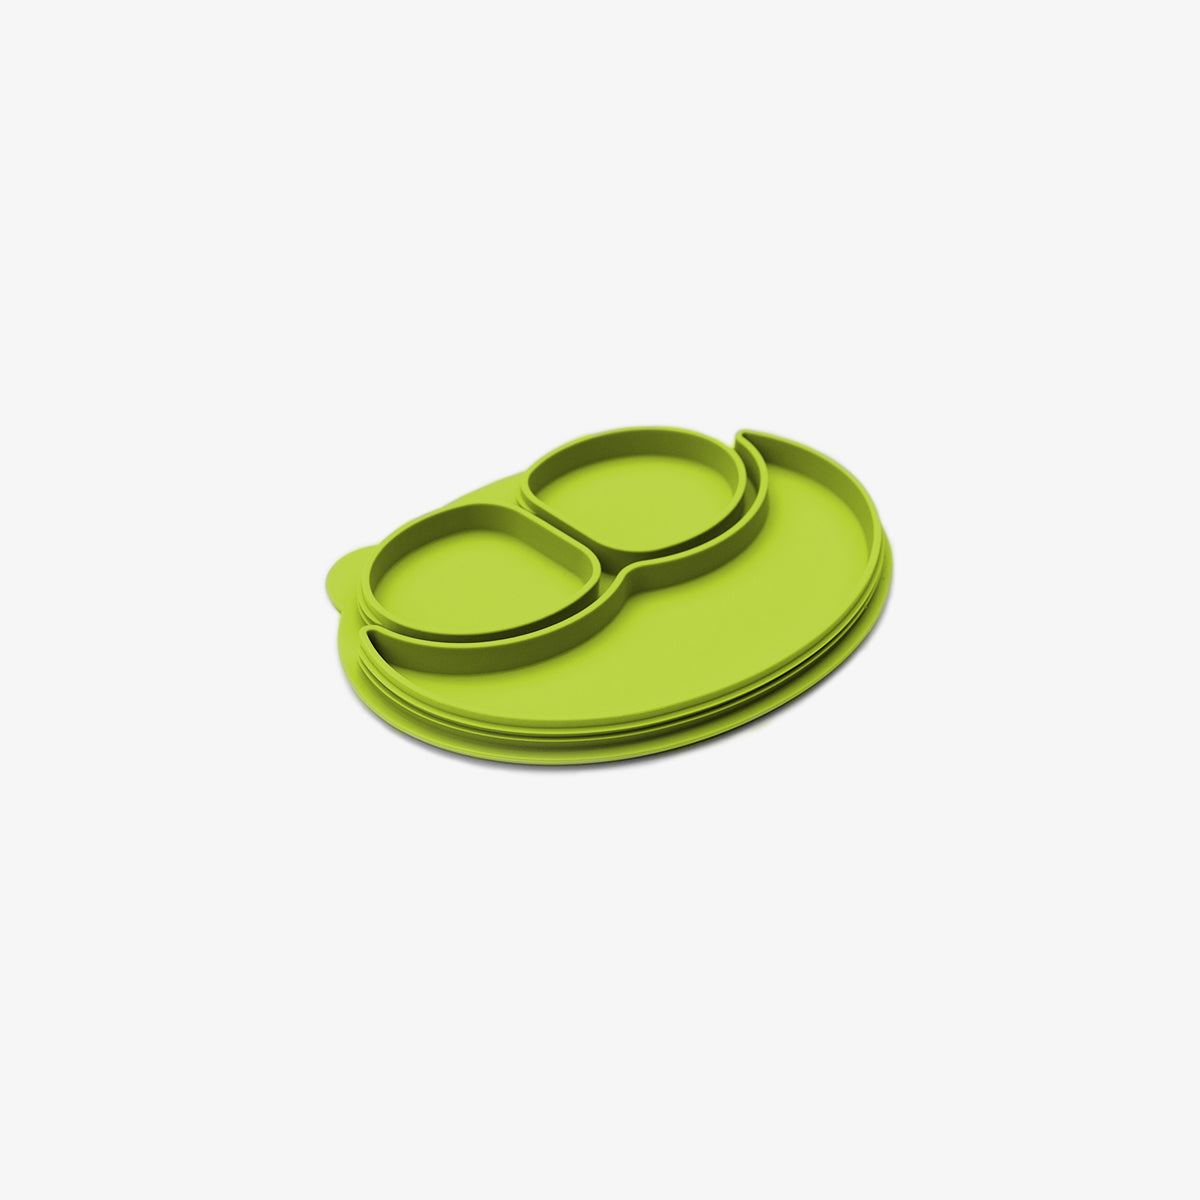 Mini Mat Lid in Lime / Storage Lids for the Mini Mat by ezpz / Silicone Lid for Toddler Plate